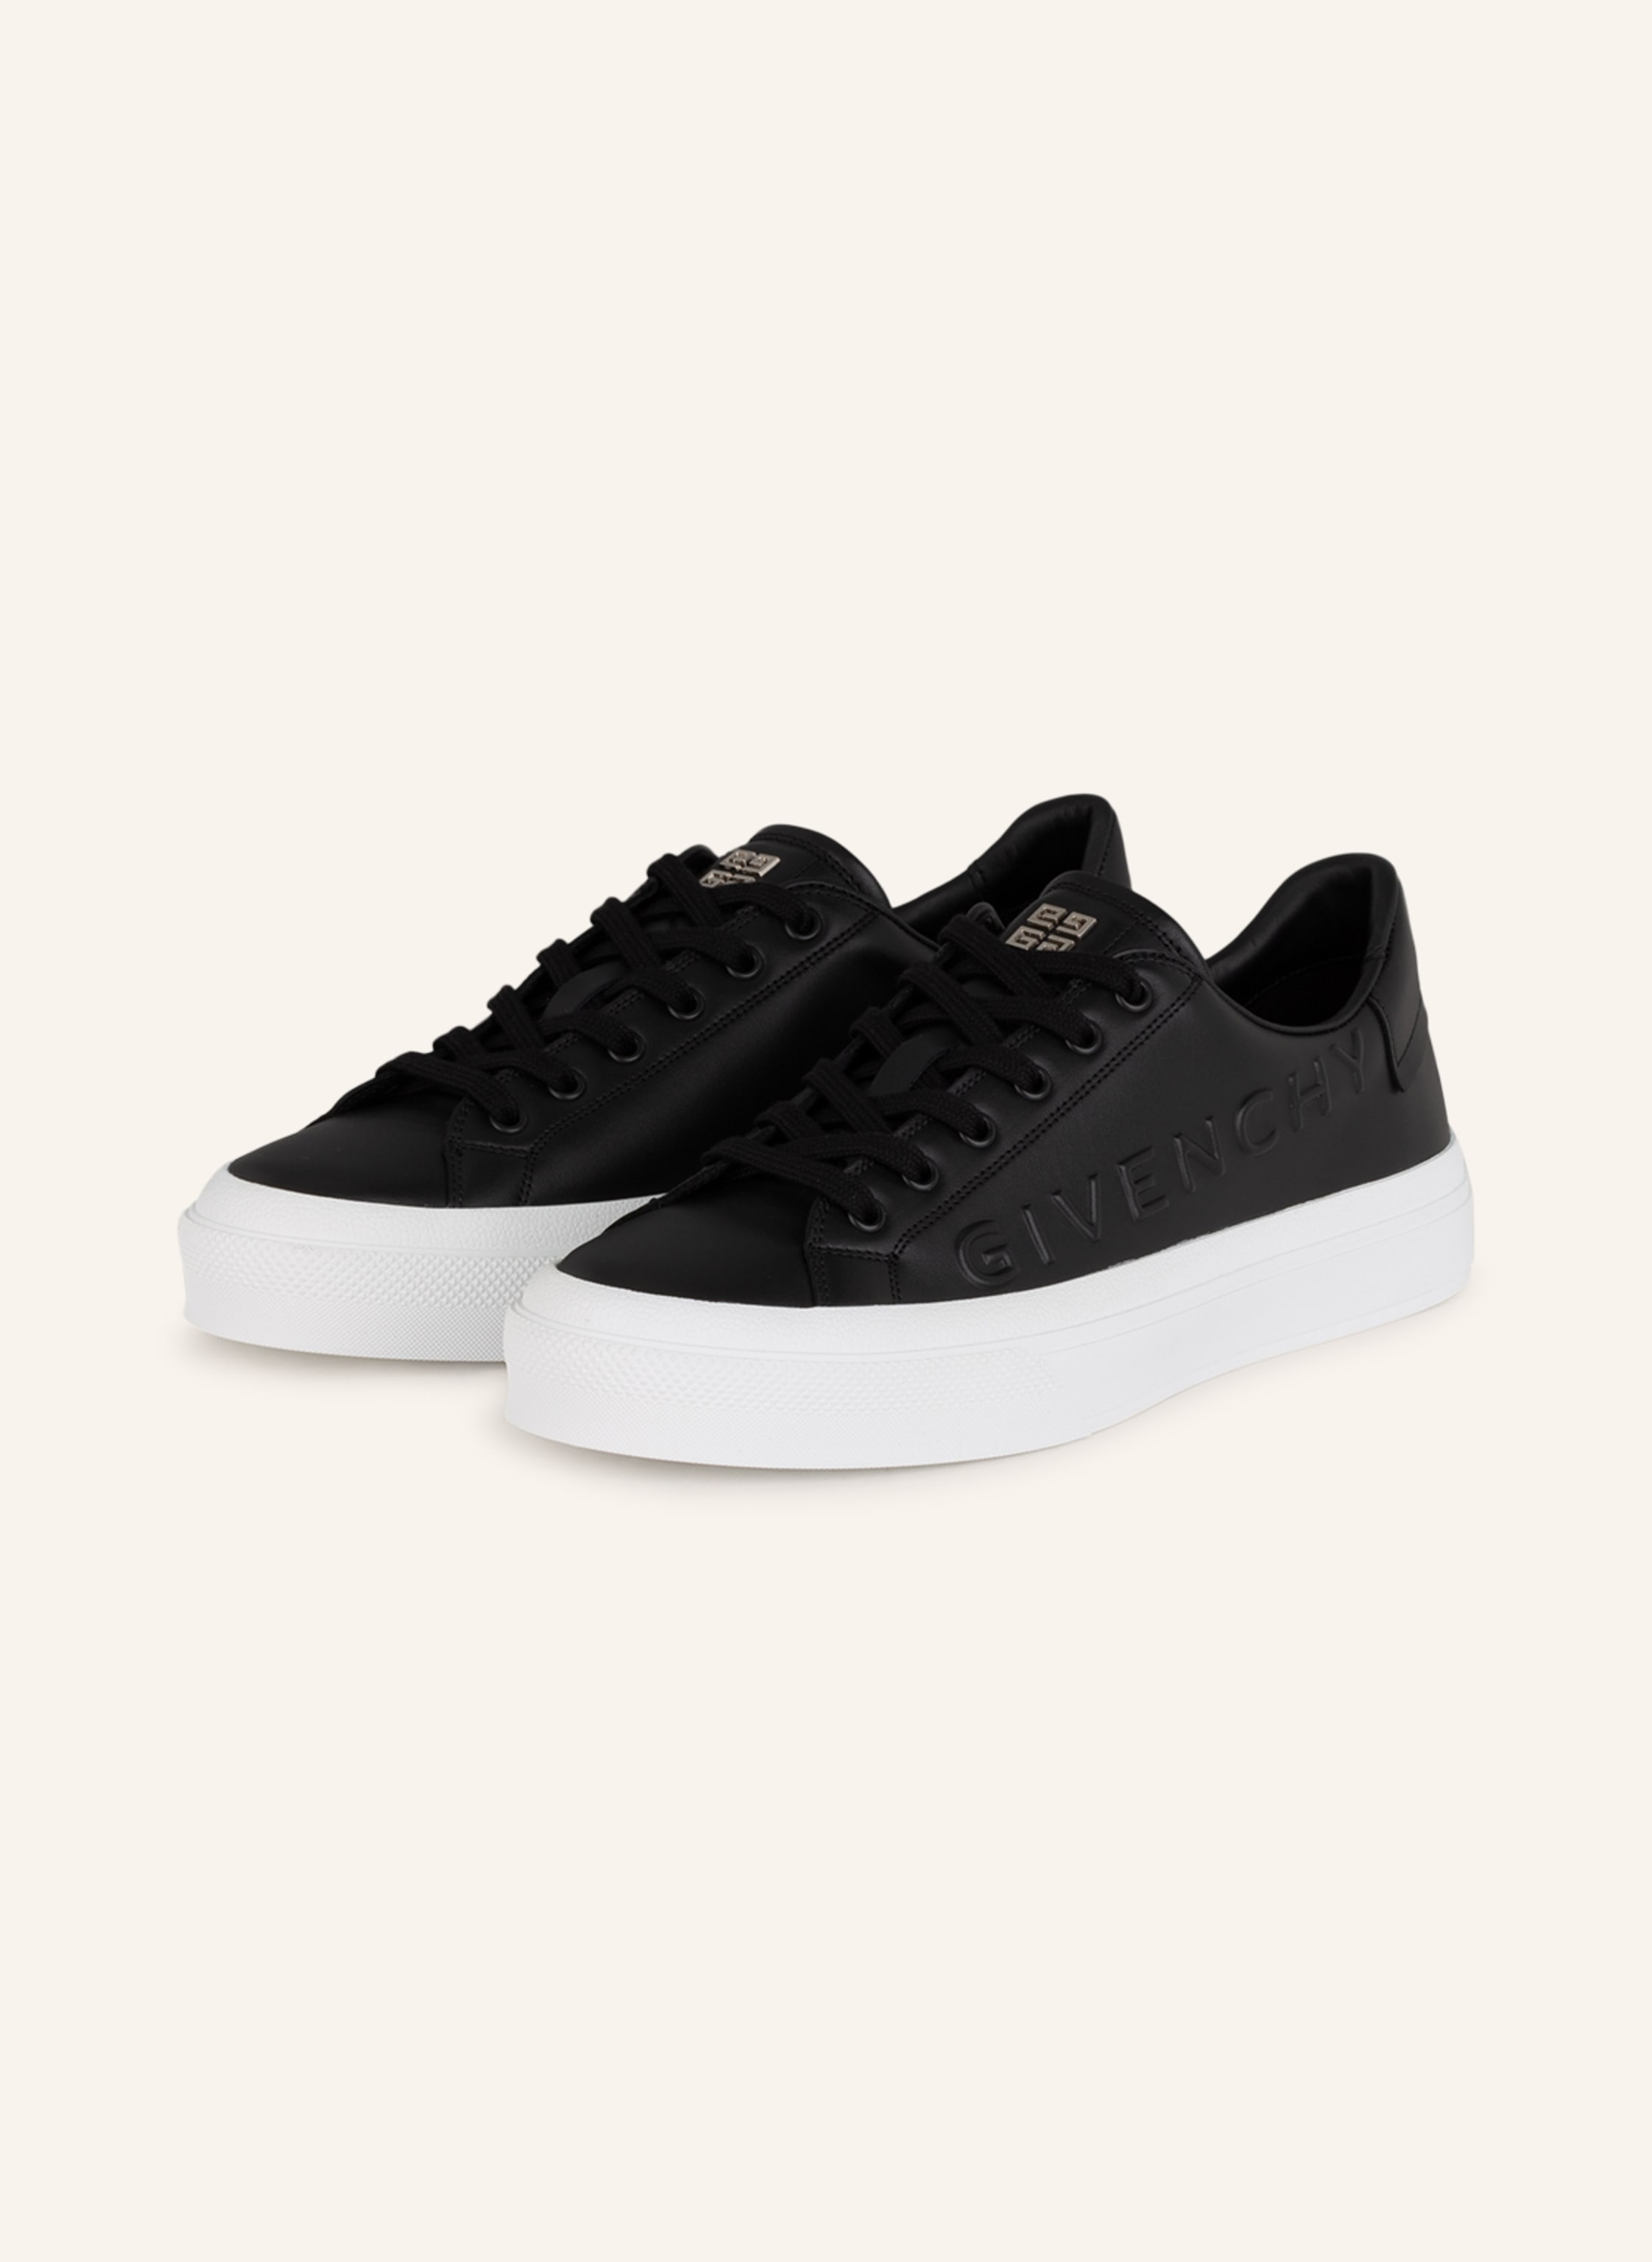 GIVENCHY Sneakers CITY SPORT in black | Breuninger